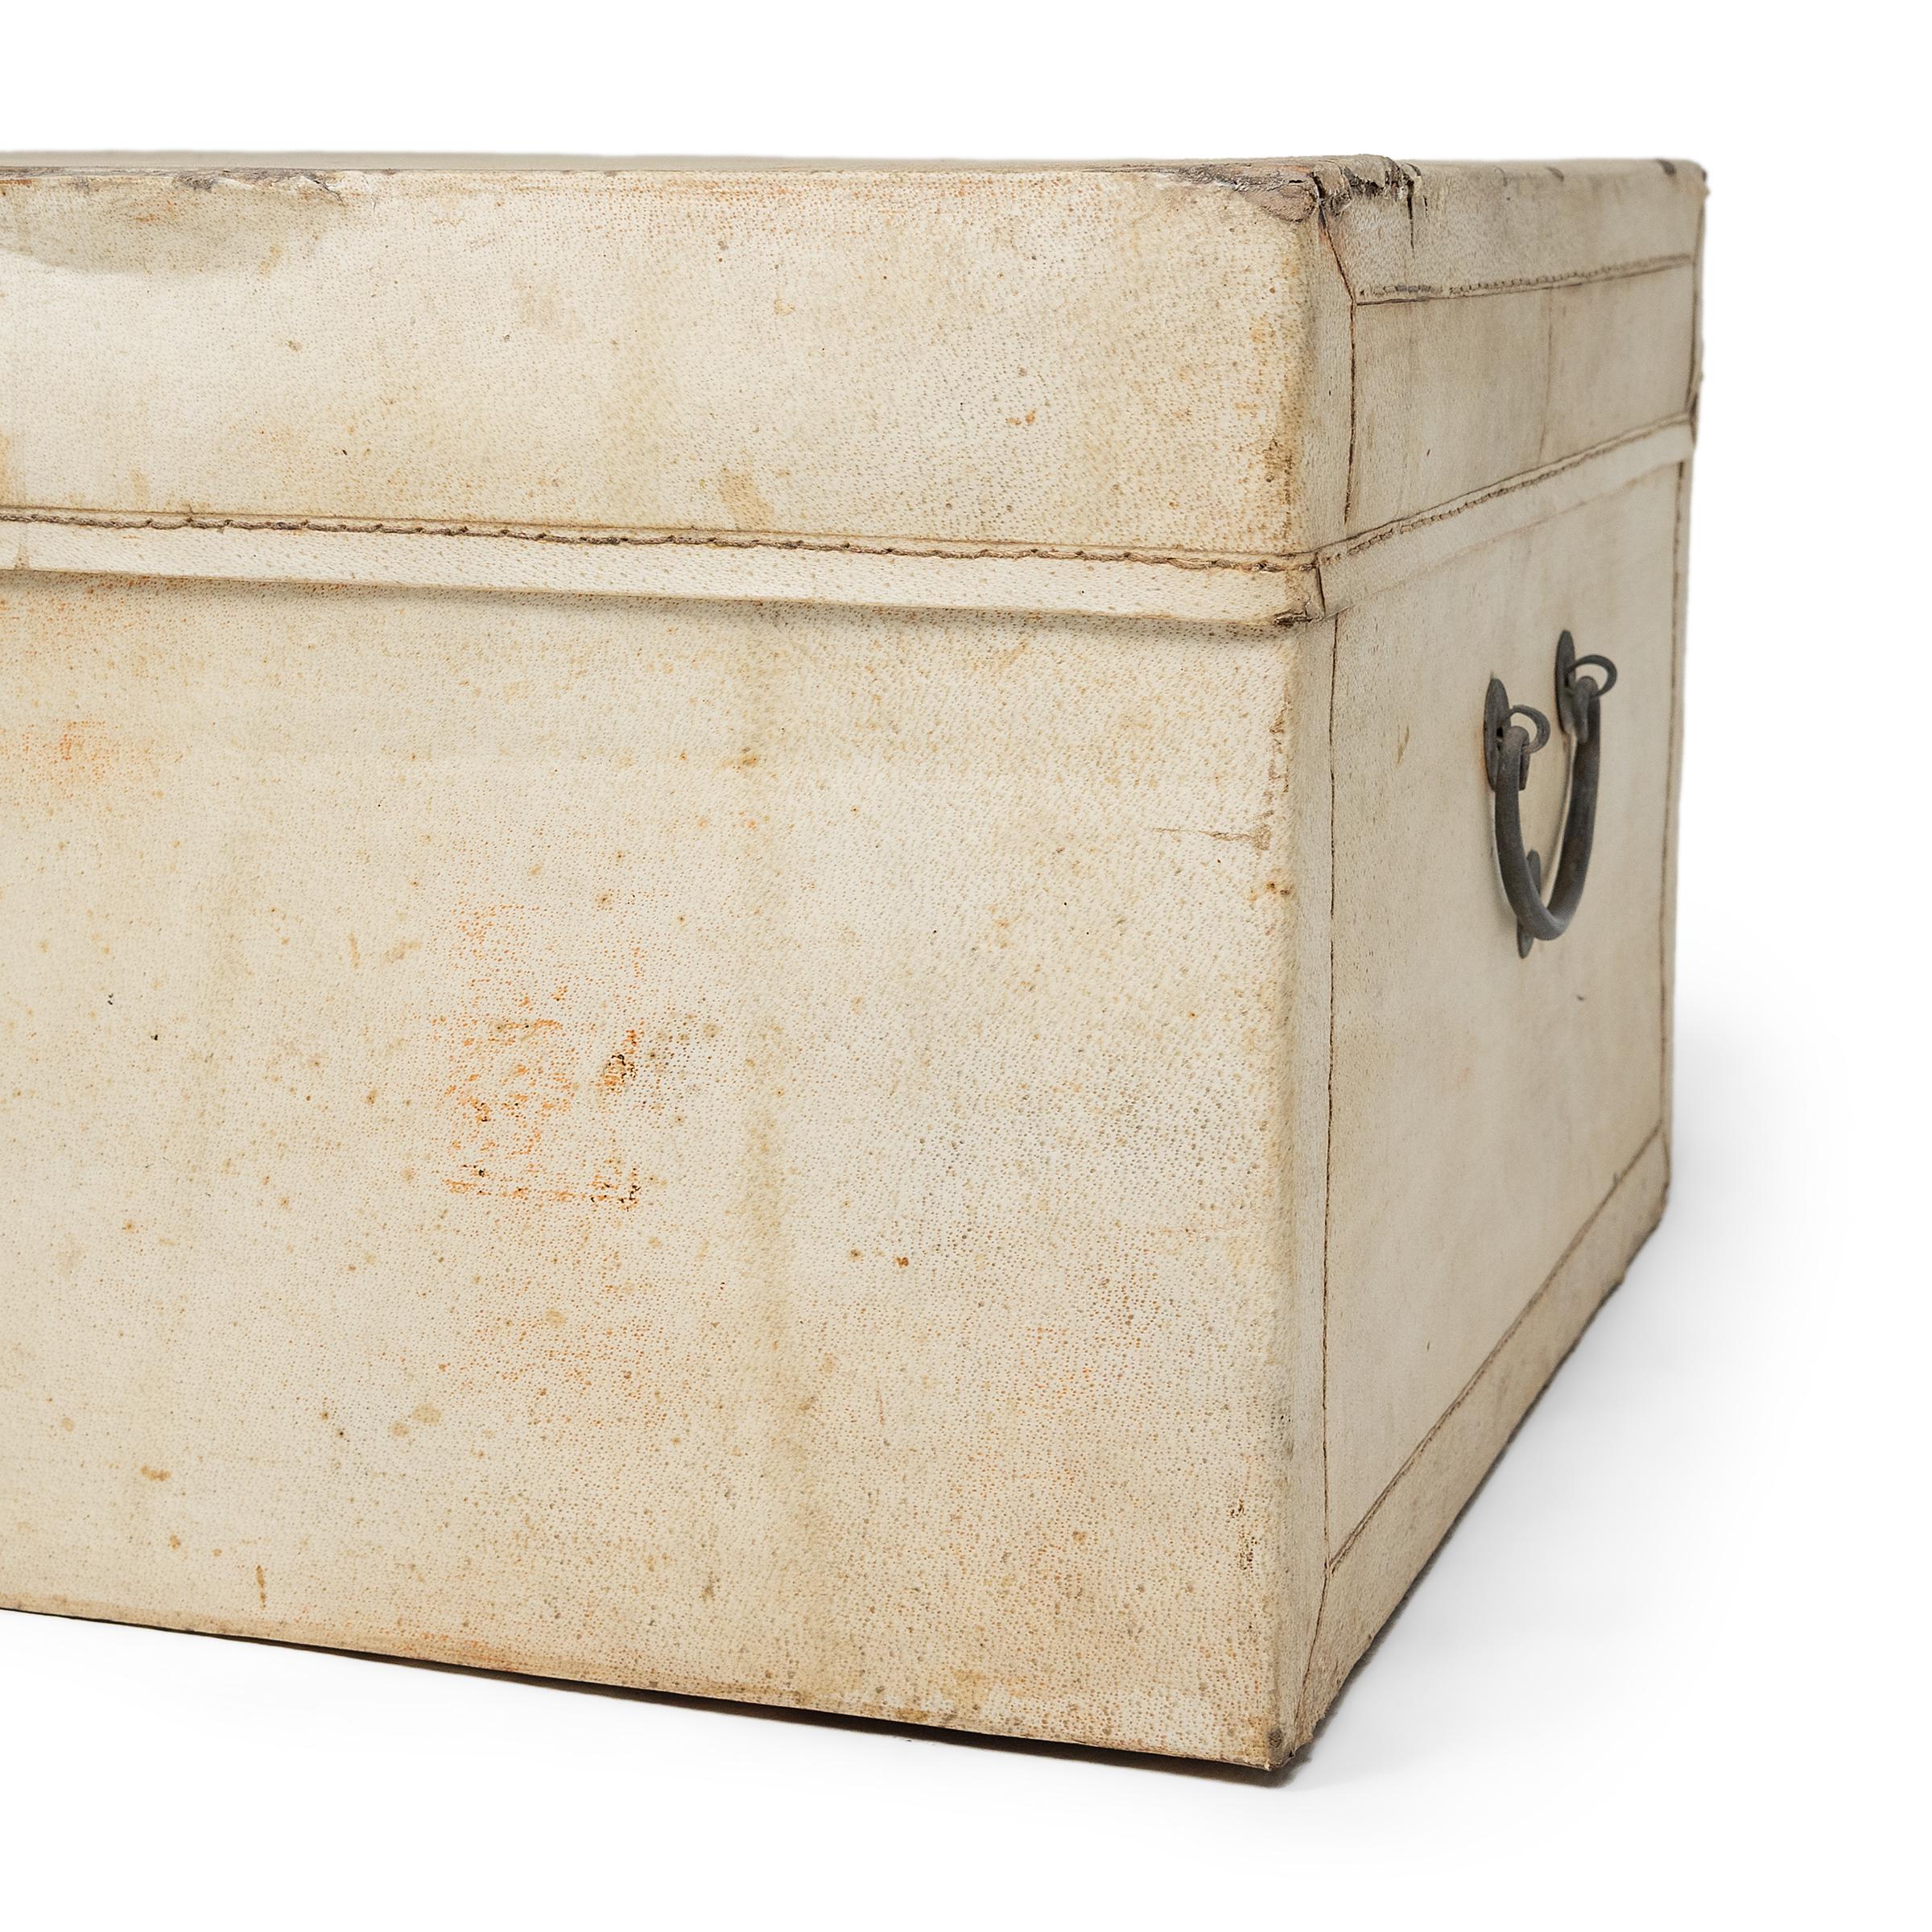 Chinese Blonde Hide Storage Trunk, c. 1800 For Sale 6